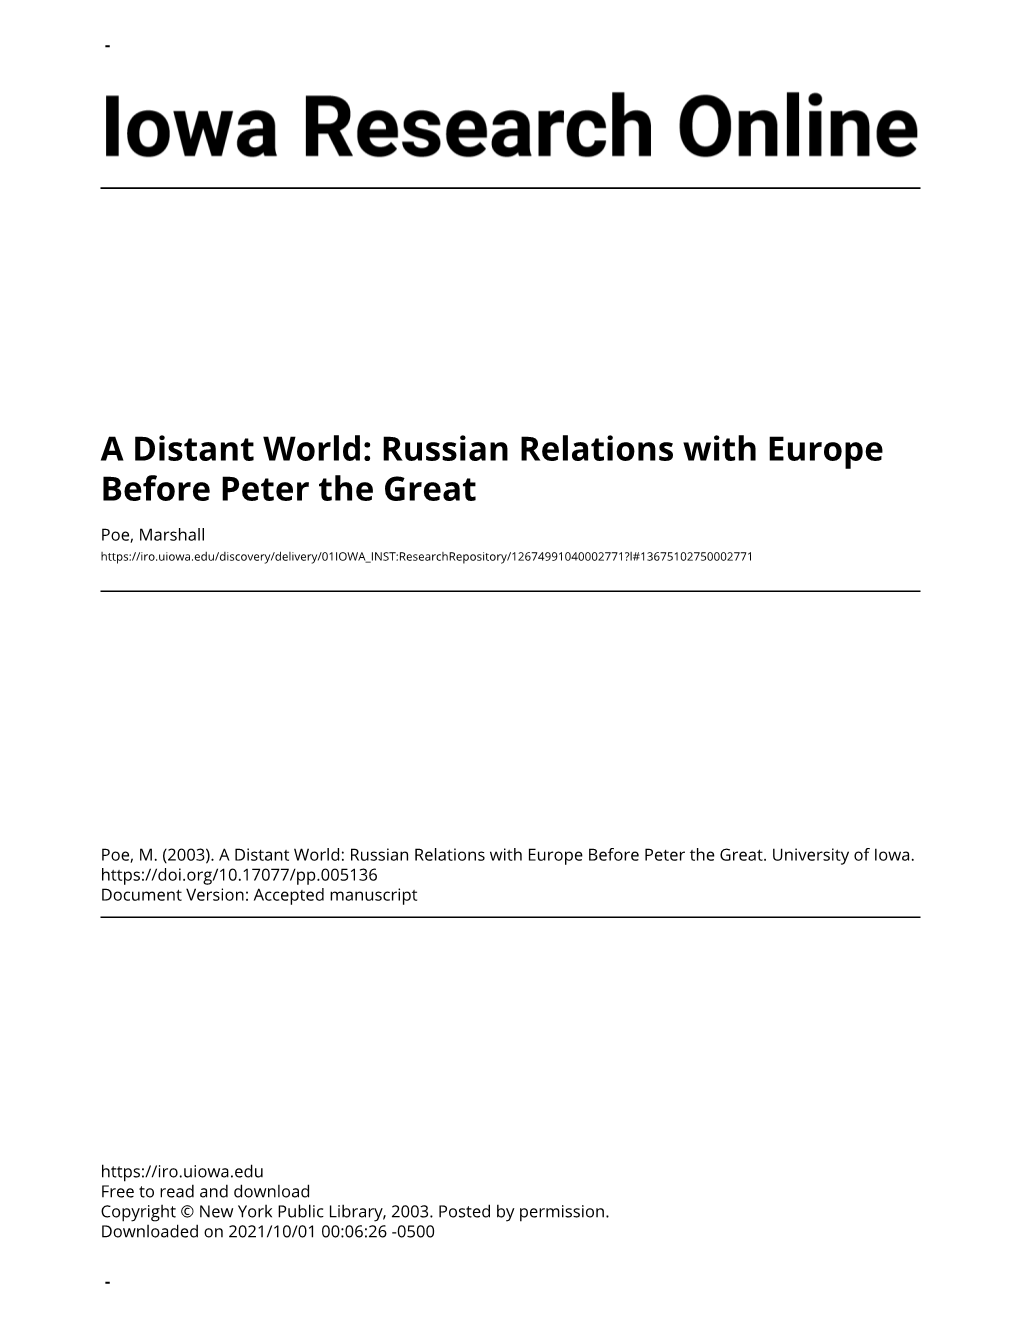 A Distant World: Russian Relations with Europe Before Peter the Great